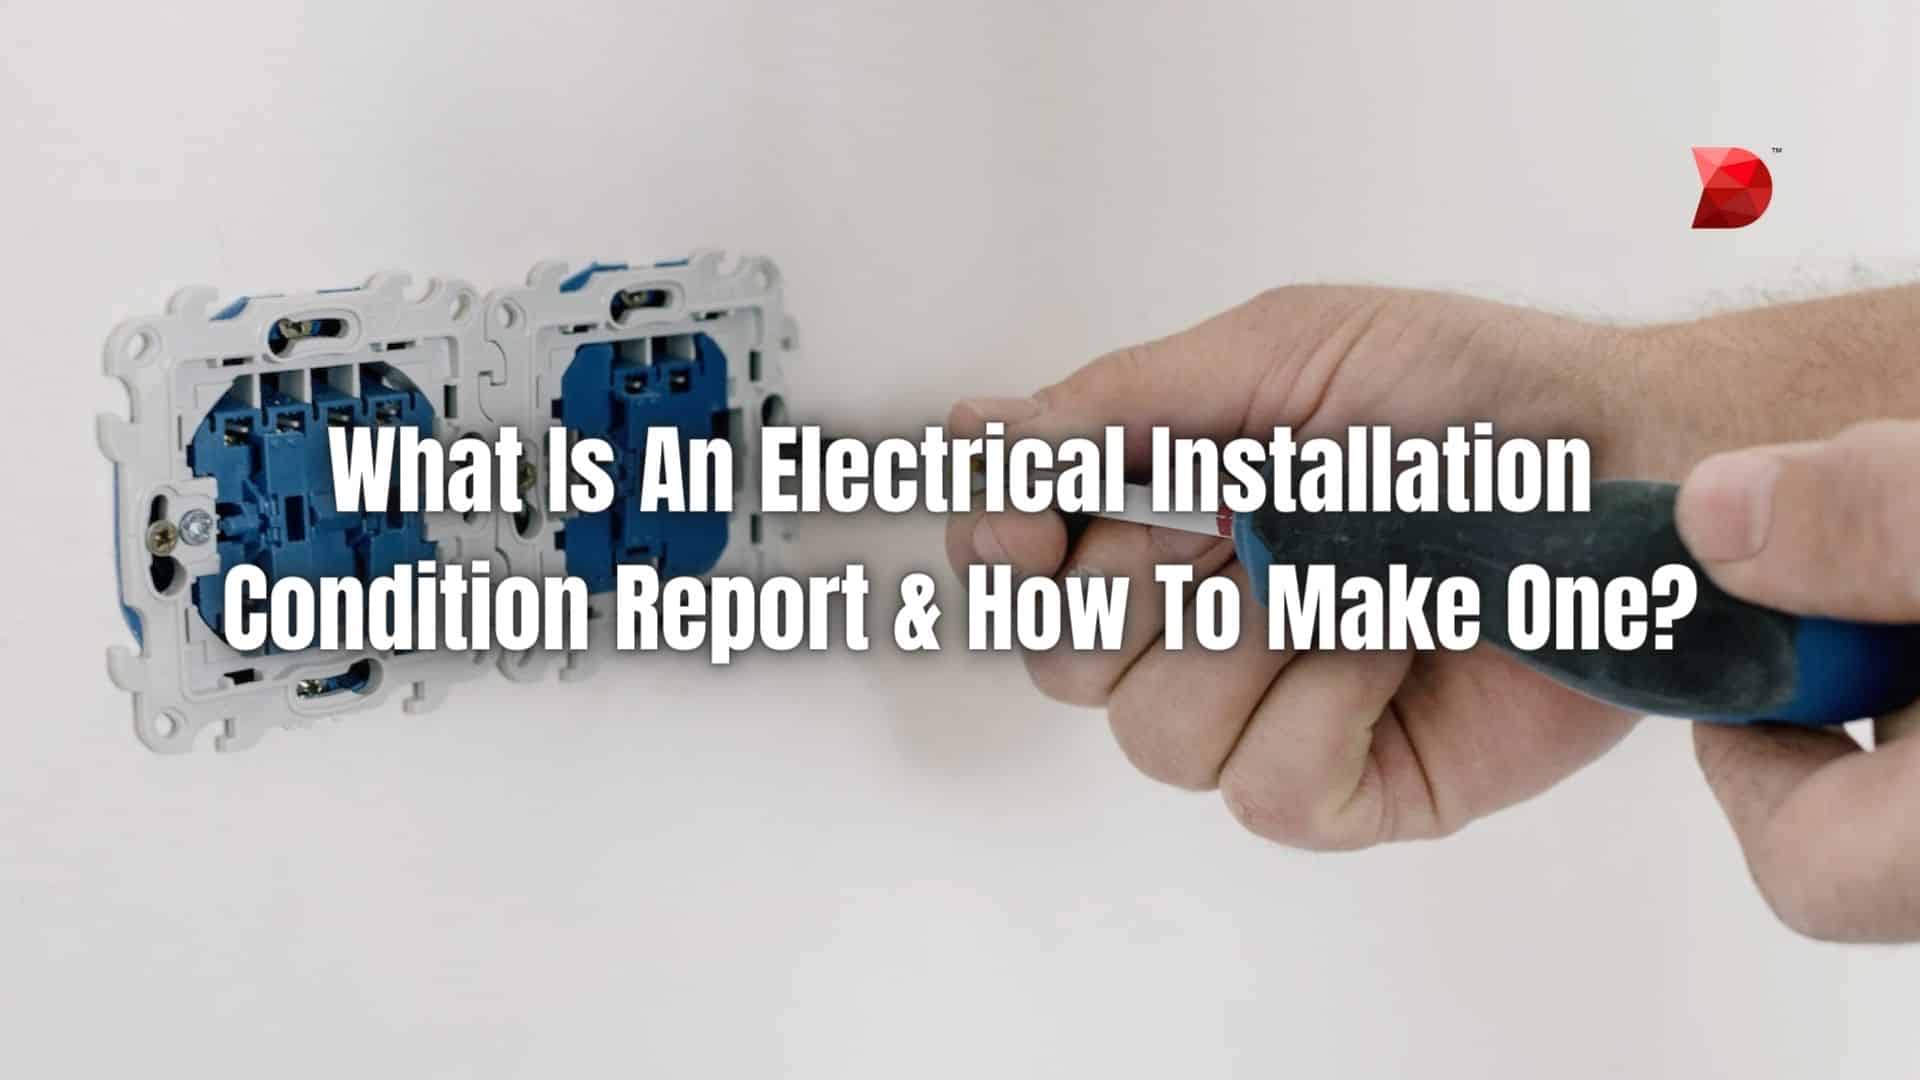 What Is An Electrical Installation Condition Report & How To Make One